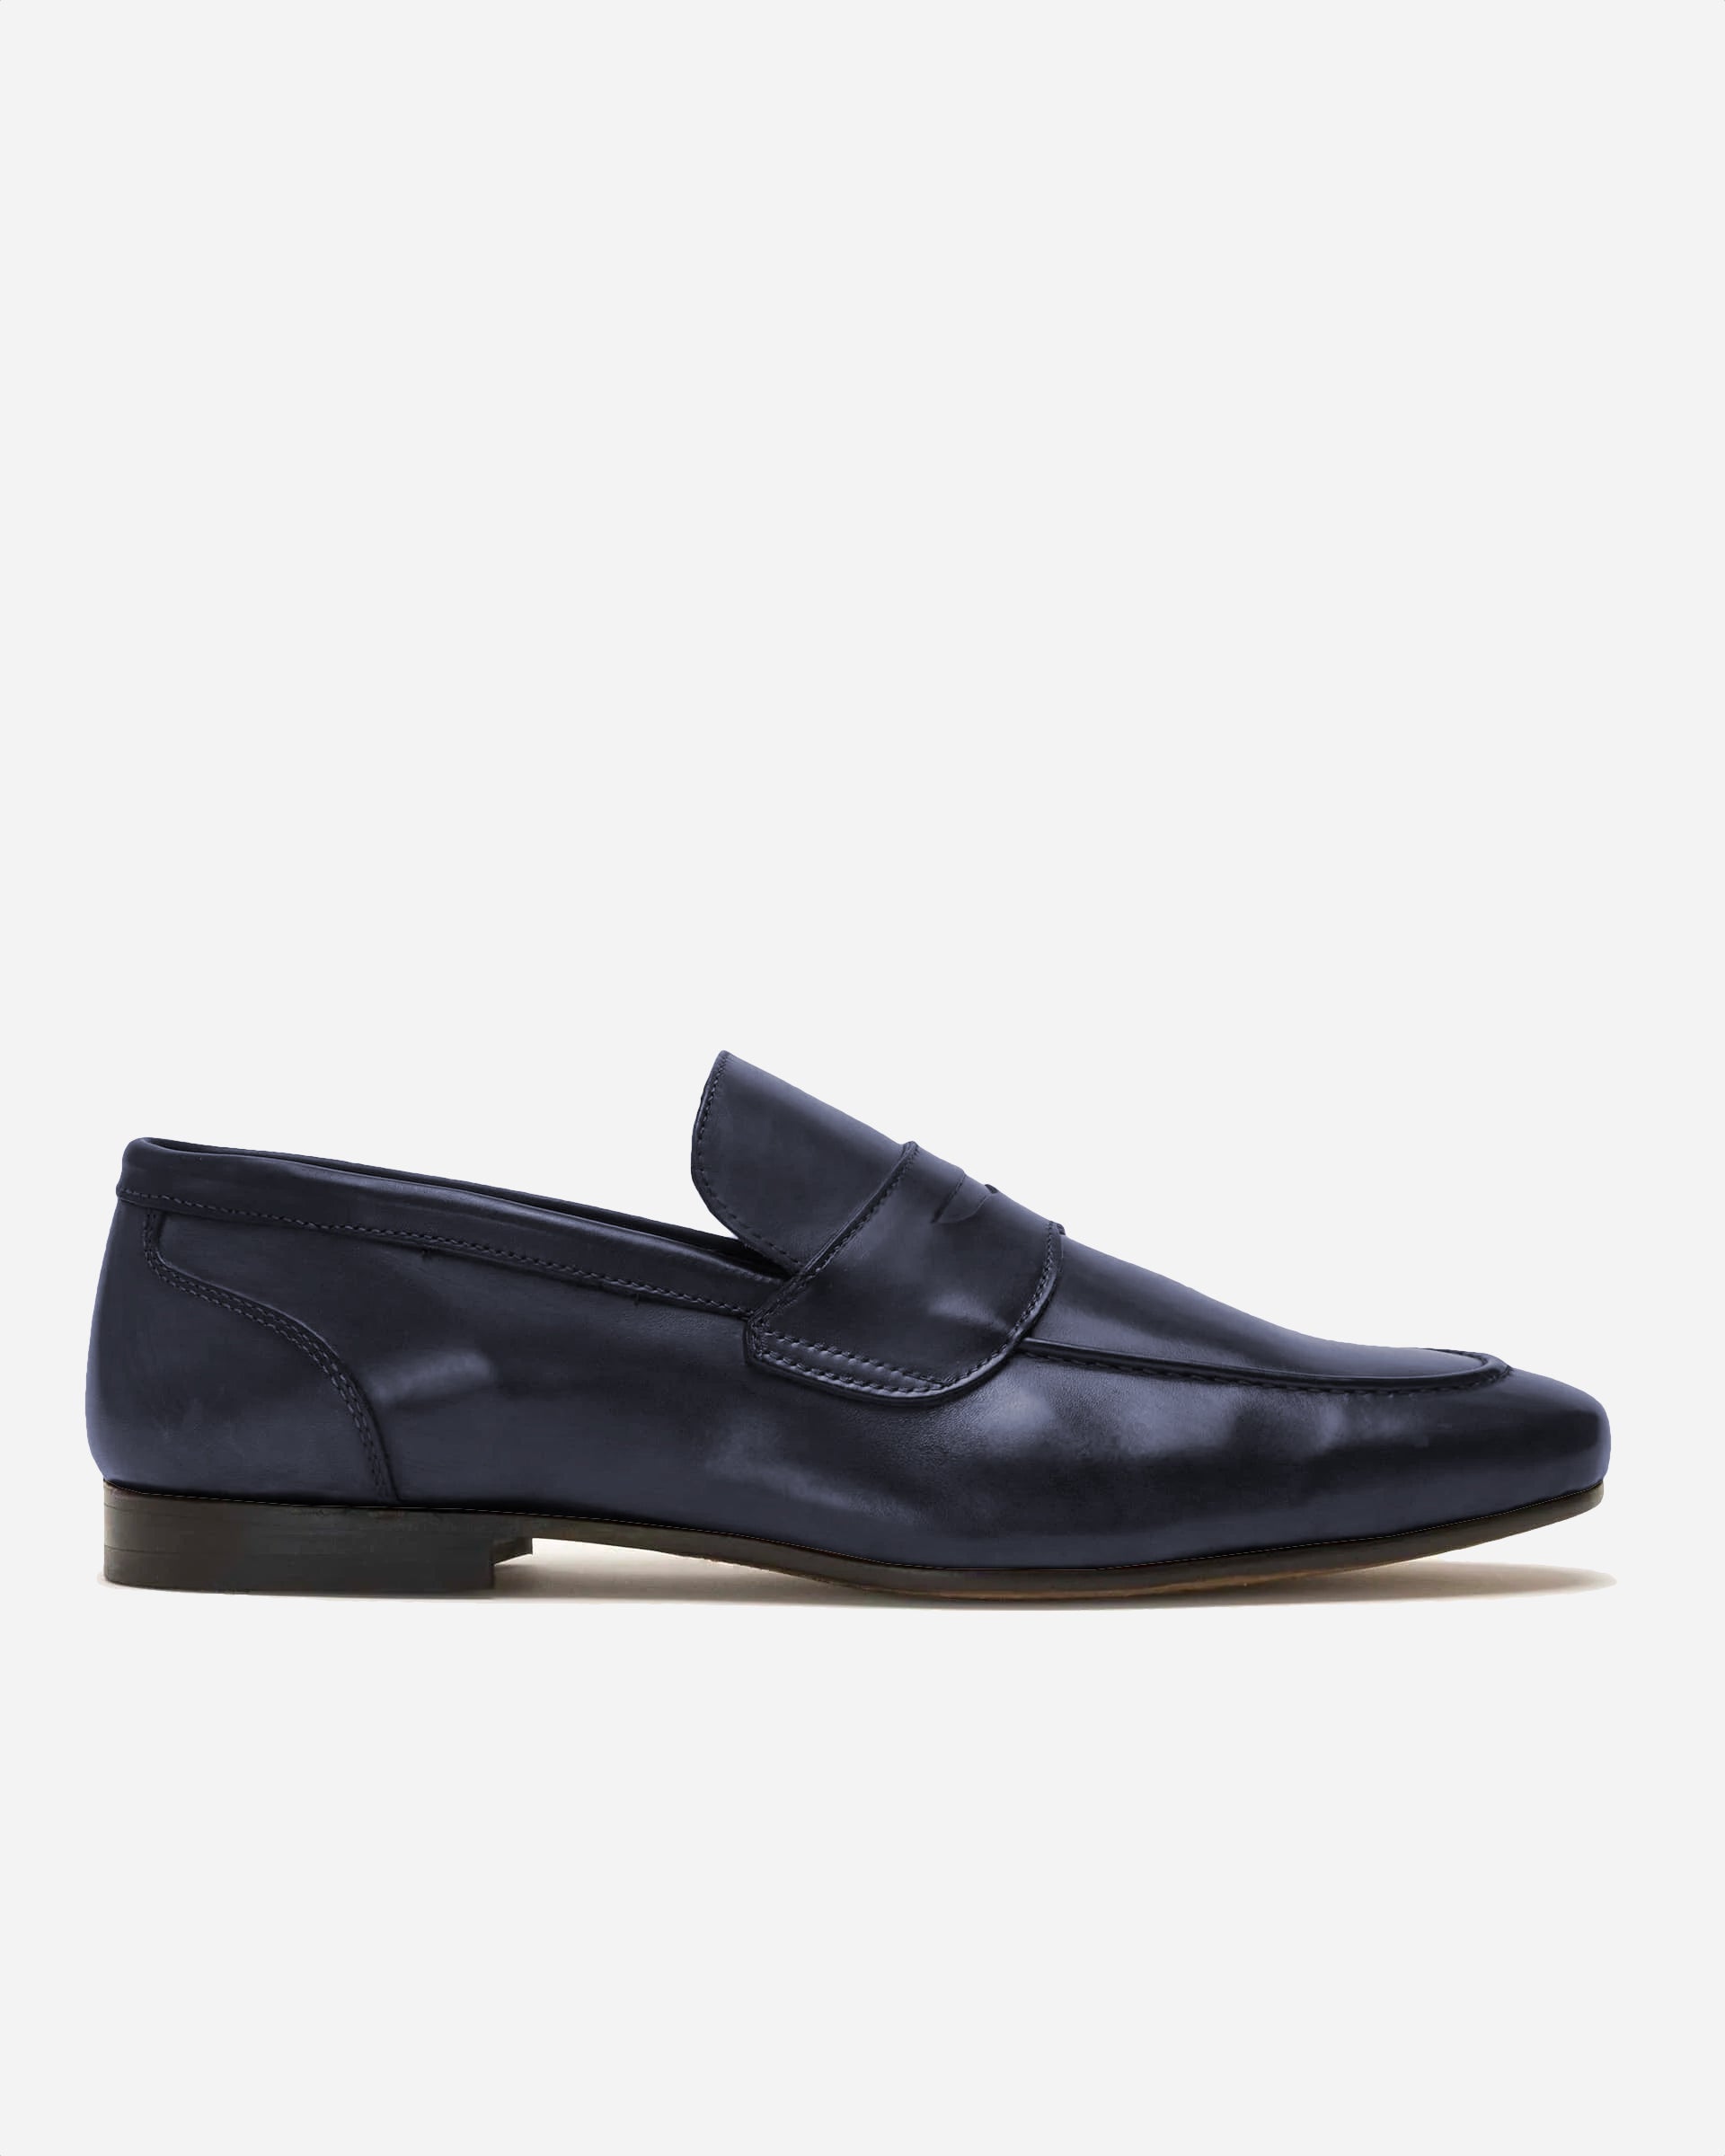 I Maschi Navy Penny Loafers - Men's Loafers at Menzclub